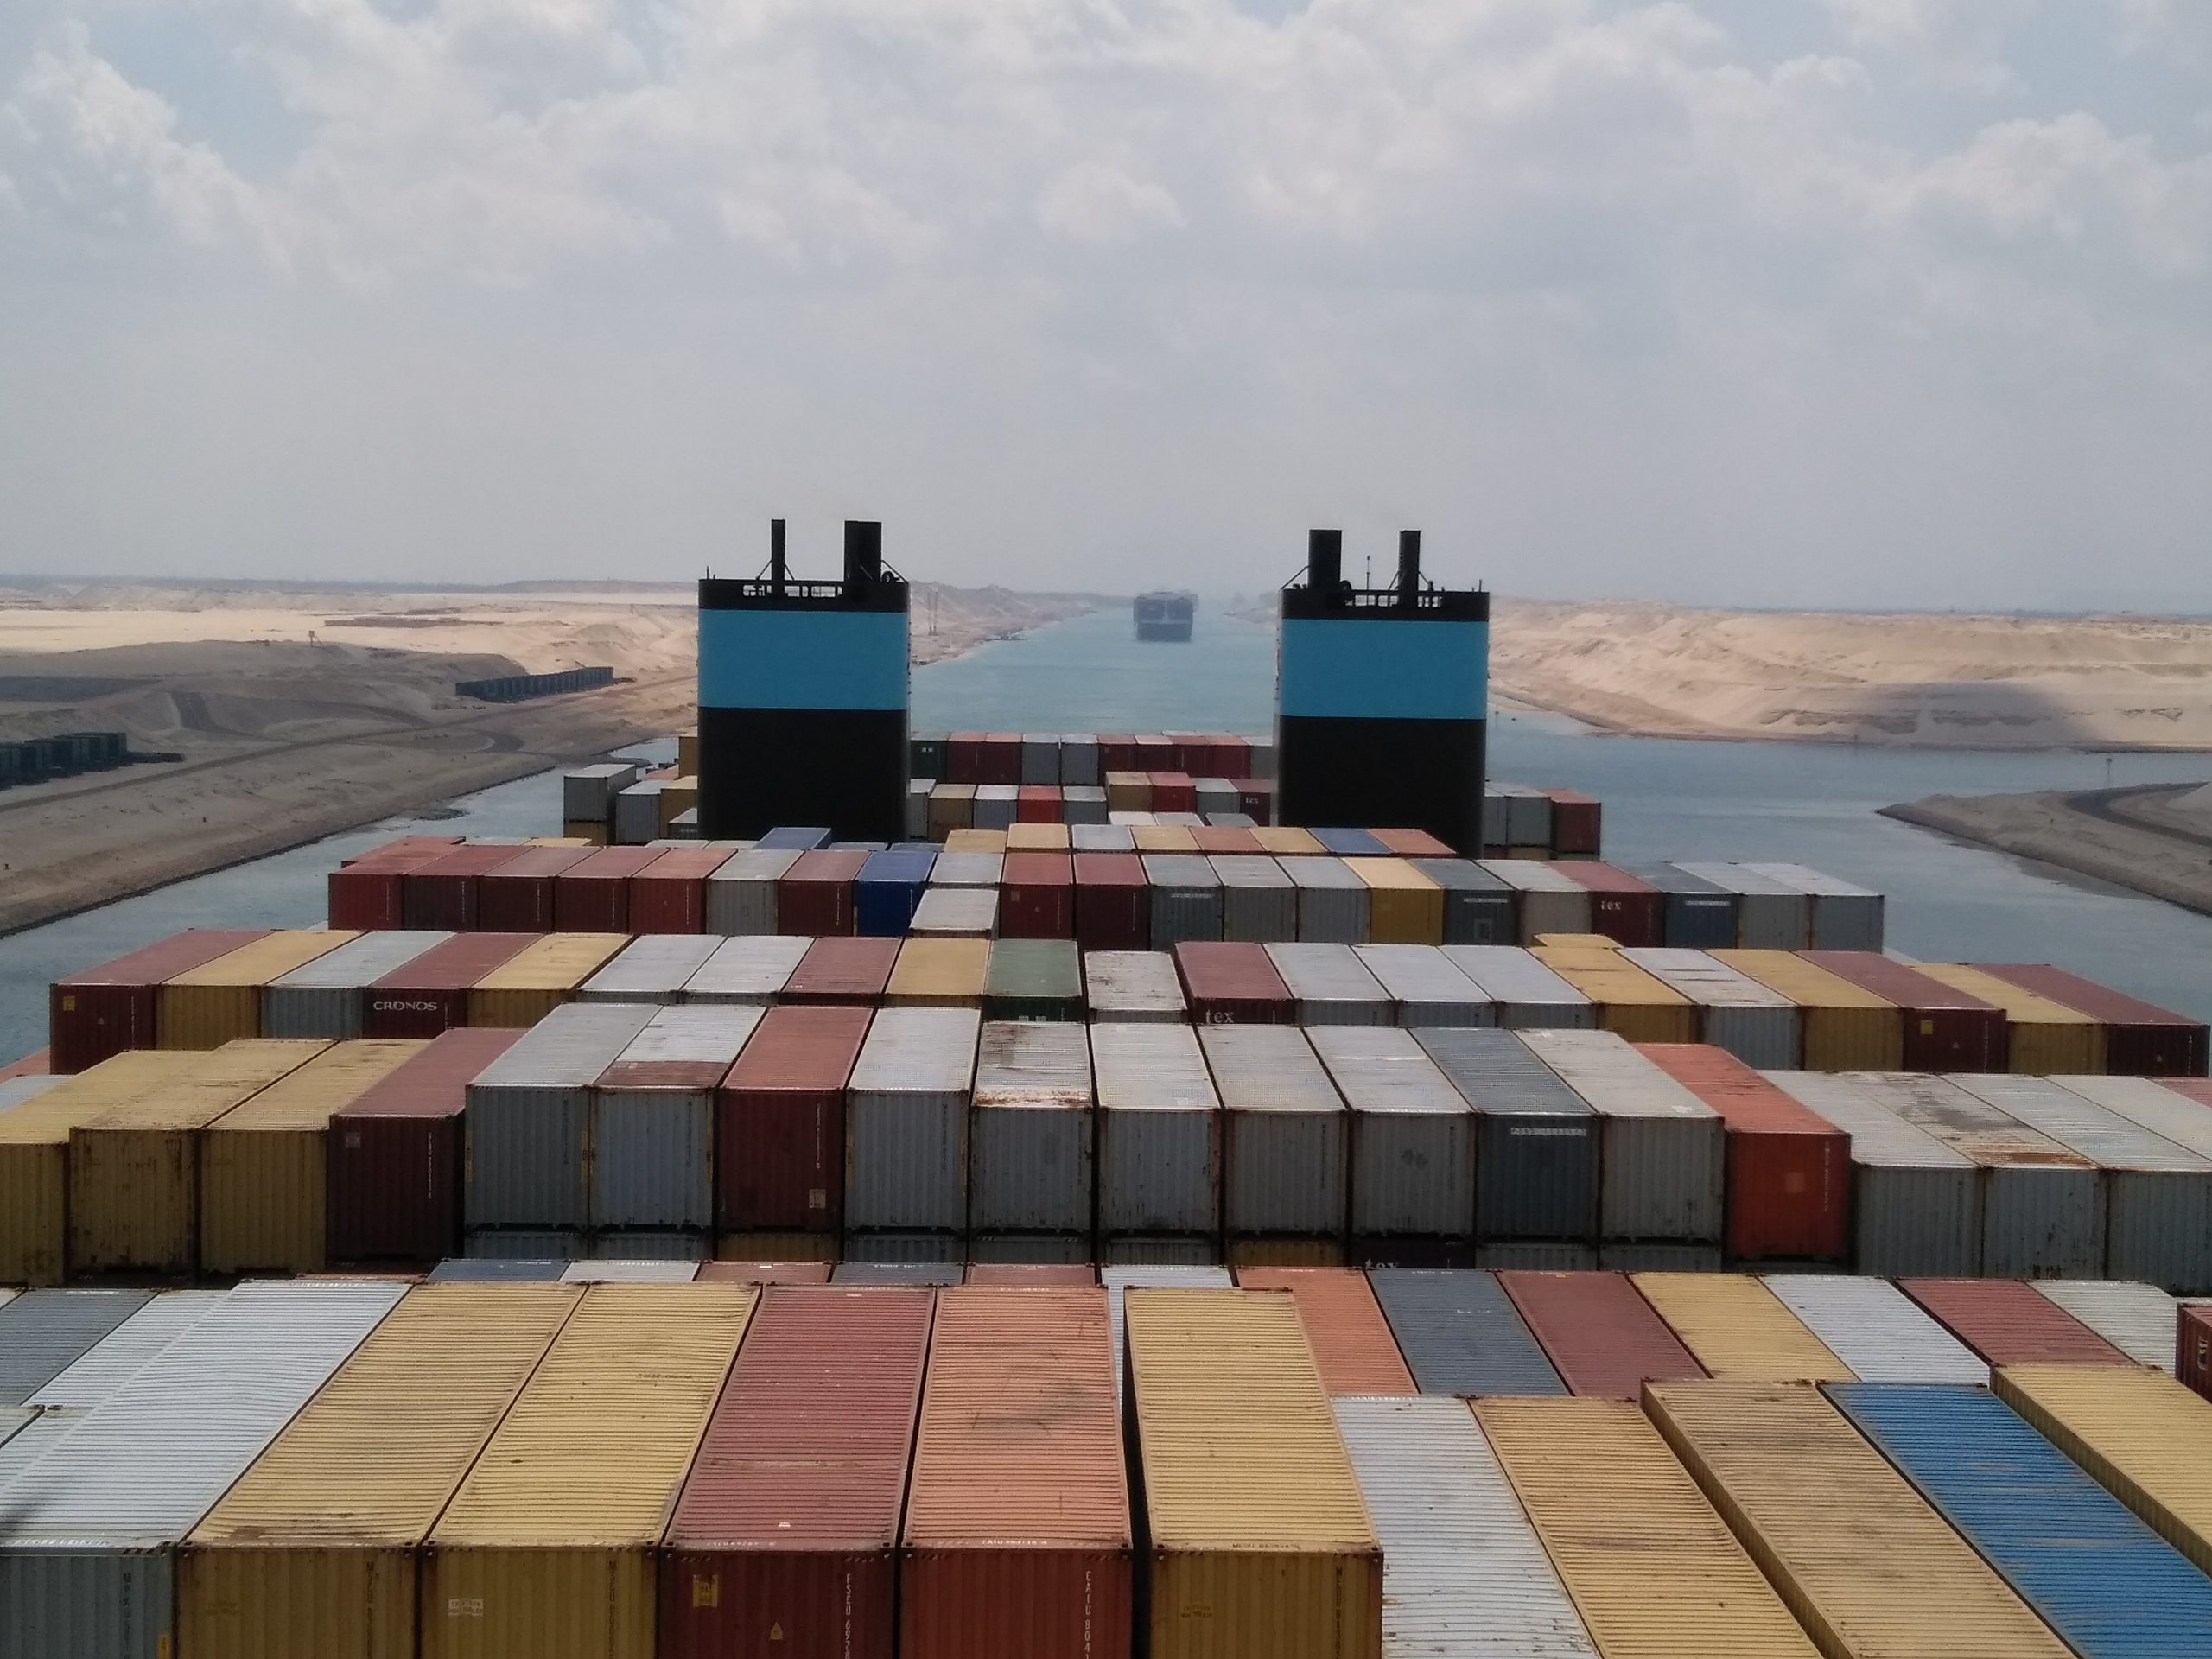 PIC: Passing between the hot desert sands of the Suez Canal, Egypt